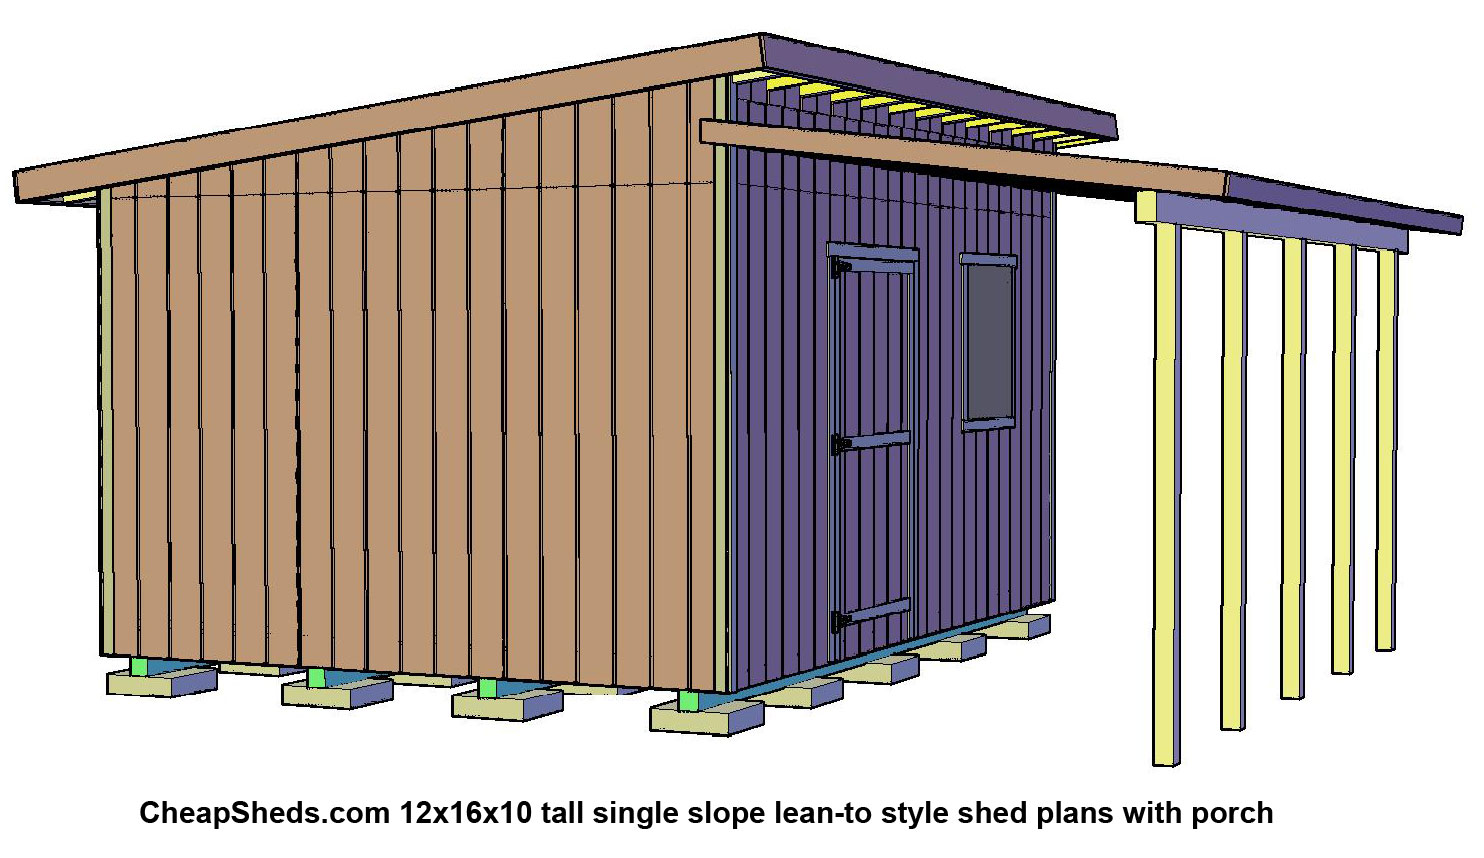 Lean To Shed Plans Lean to style sheds